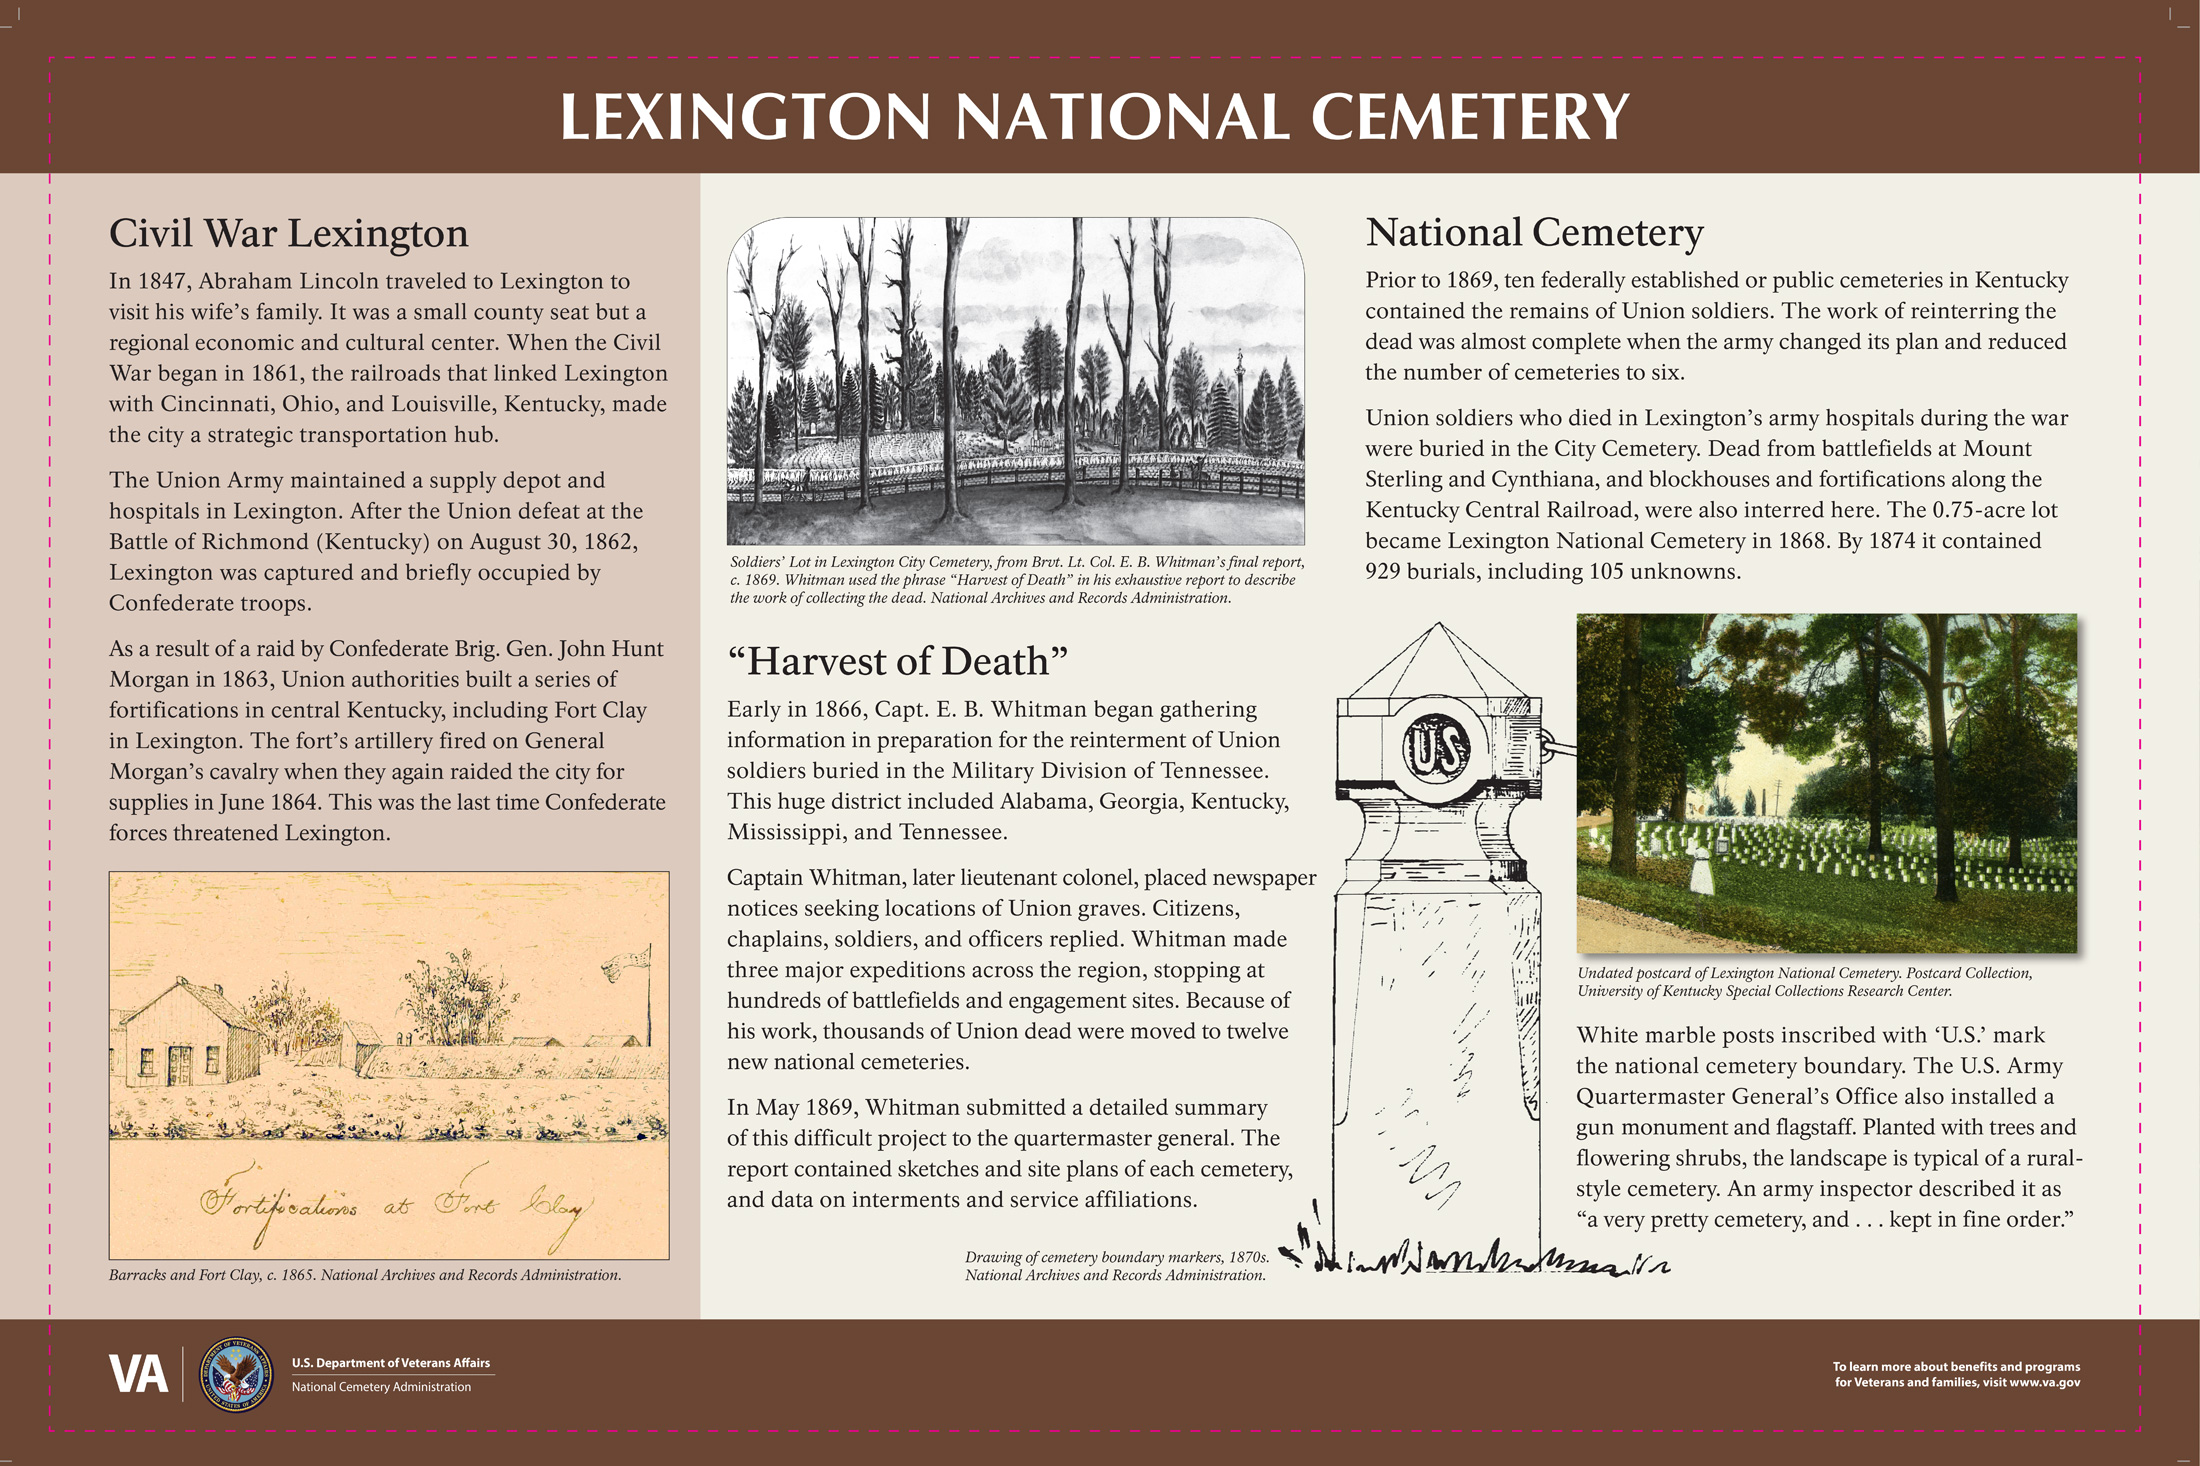 Infographic about the history of Lexington National Cemetery.